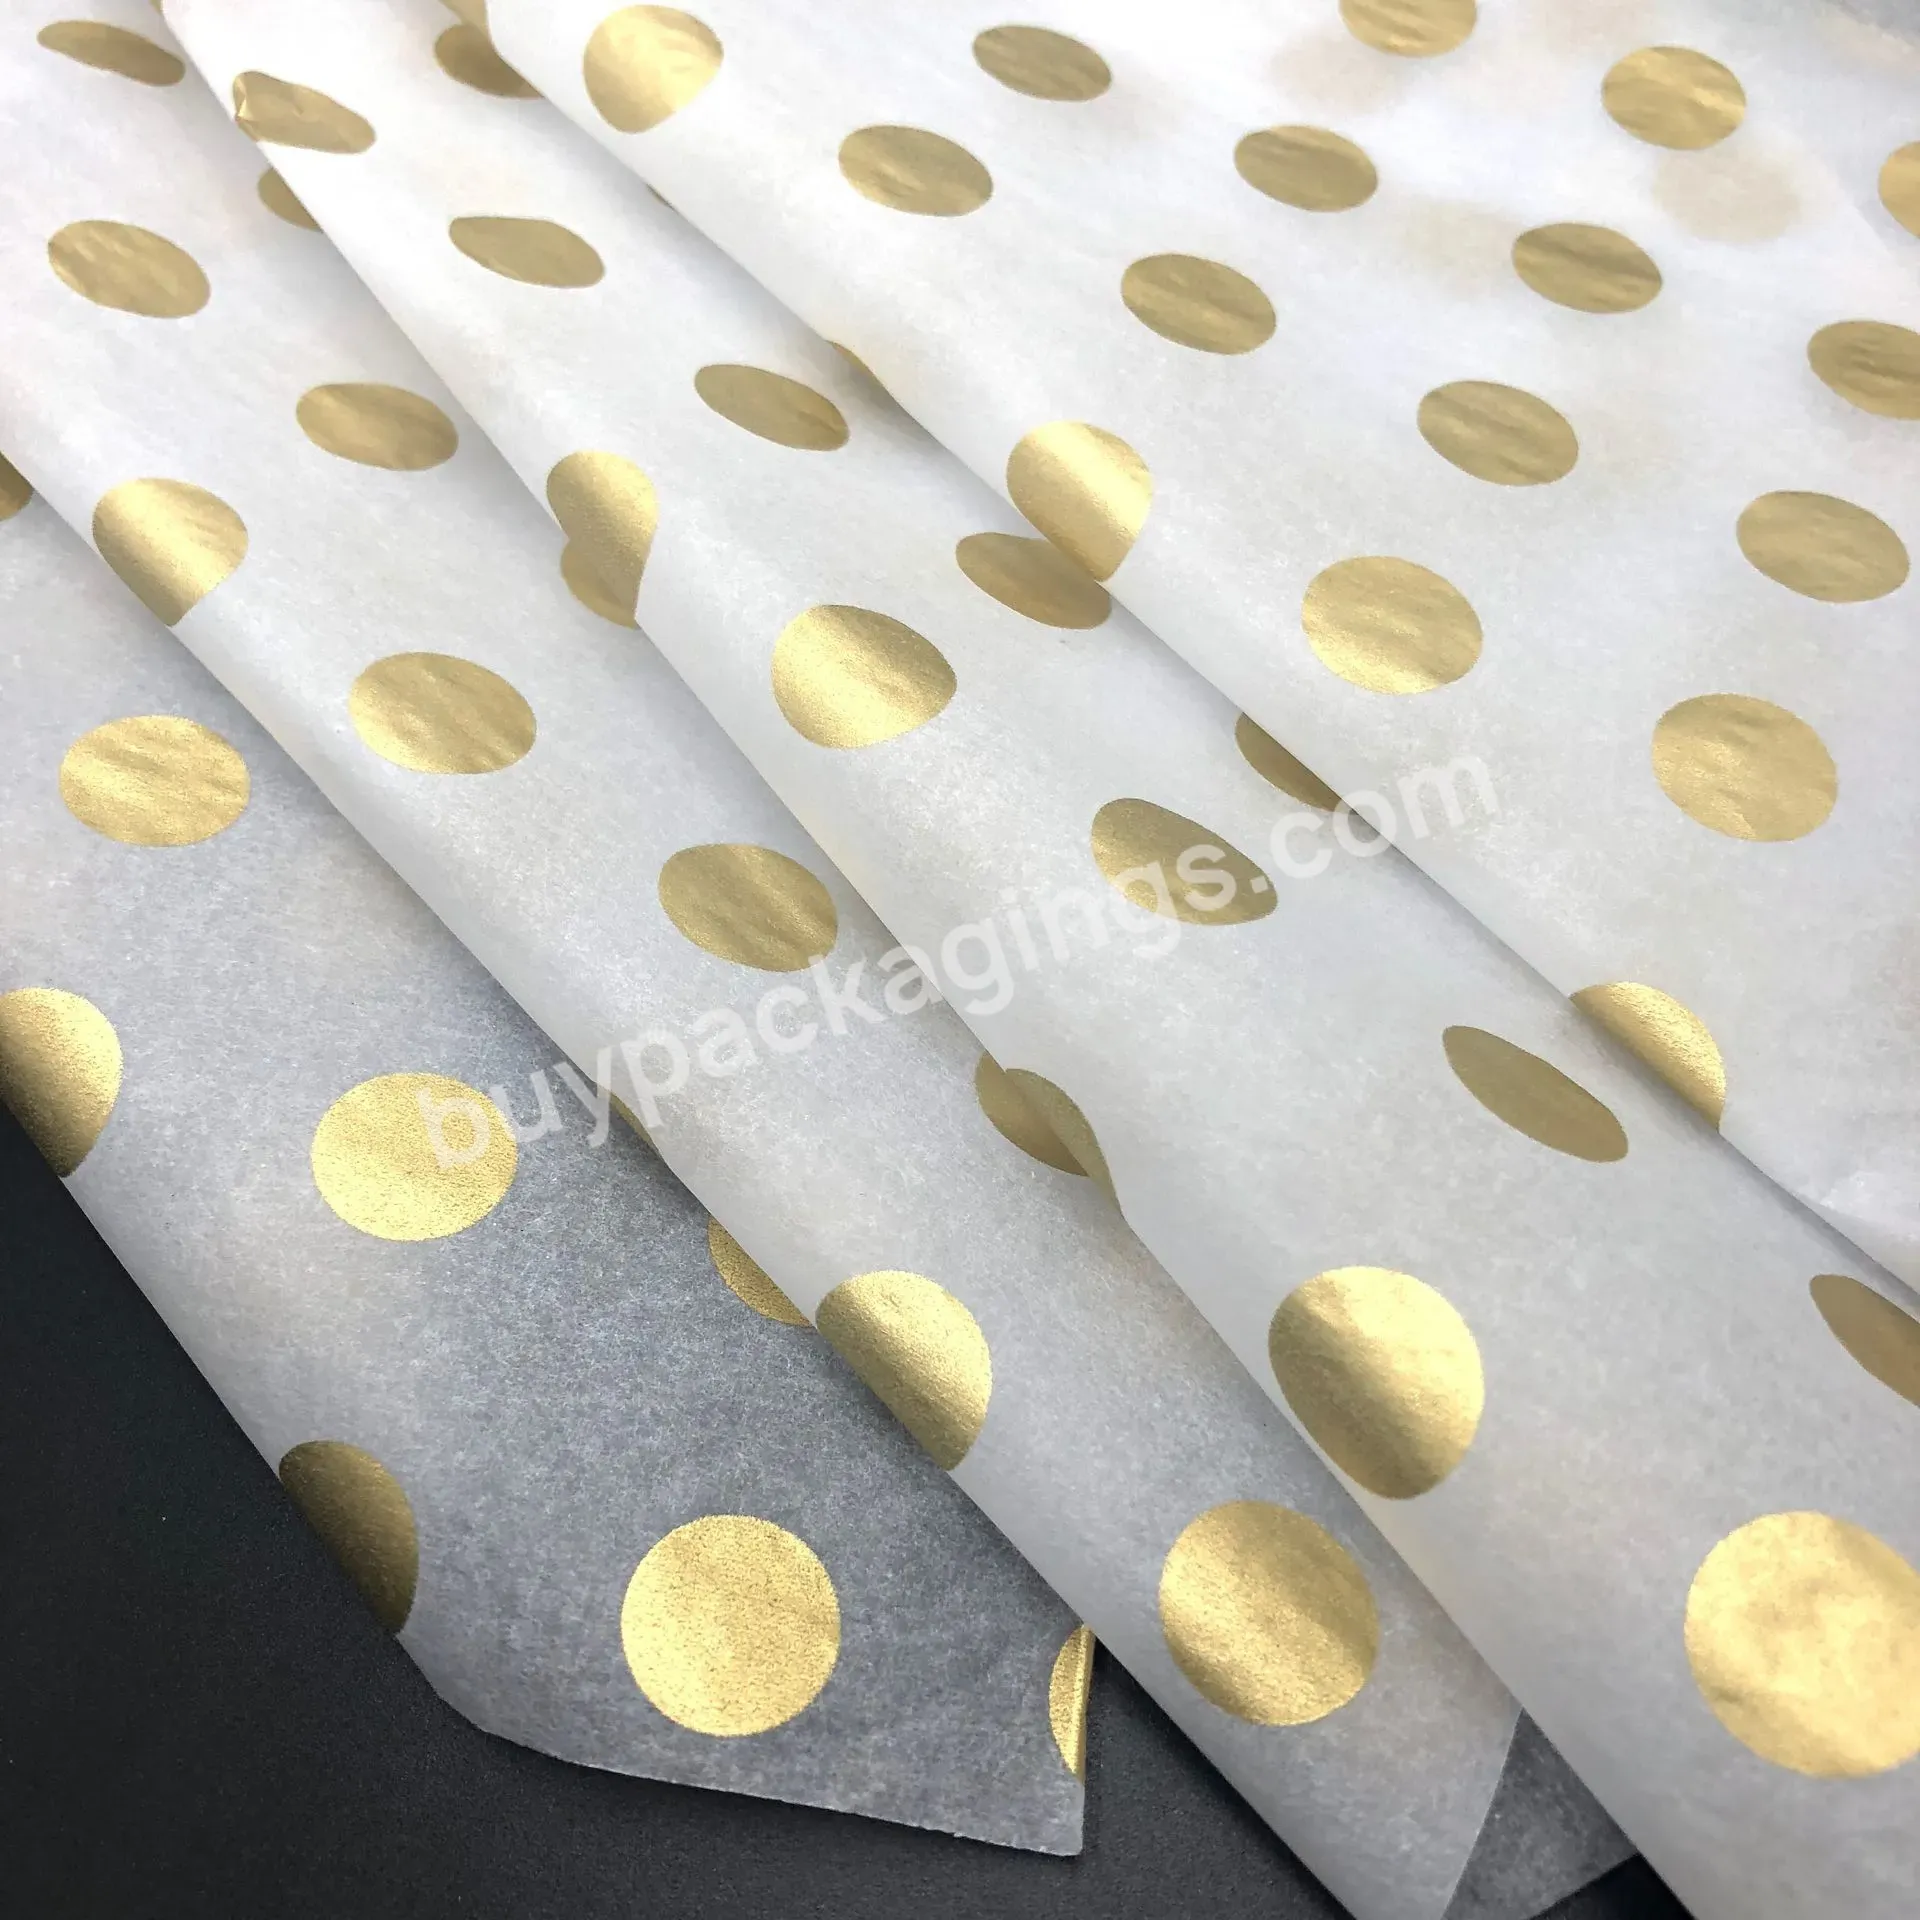 17g Acid Free White Tissue Paper With Gold Circle Printed Logo Wrapping Paper/mf Acid Free Tissue Paper - Buy Mf Acid Free Tissue Paper,Gold Circle Printed Logo Wrapping Paper,Gold Circle Wrapping Paper.